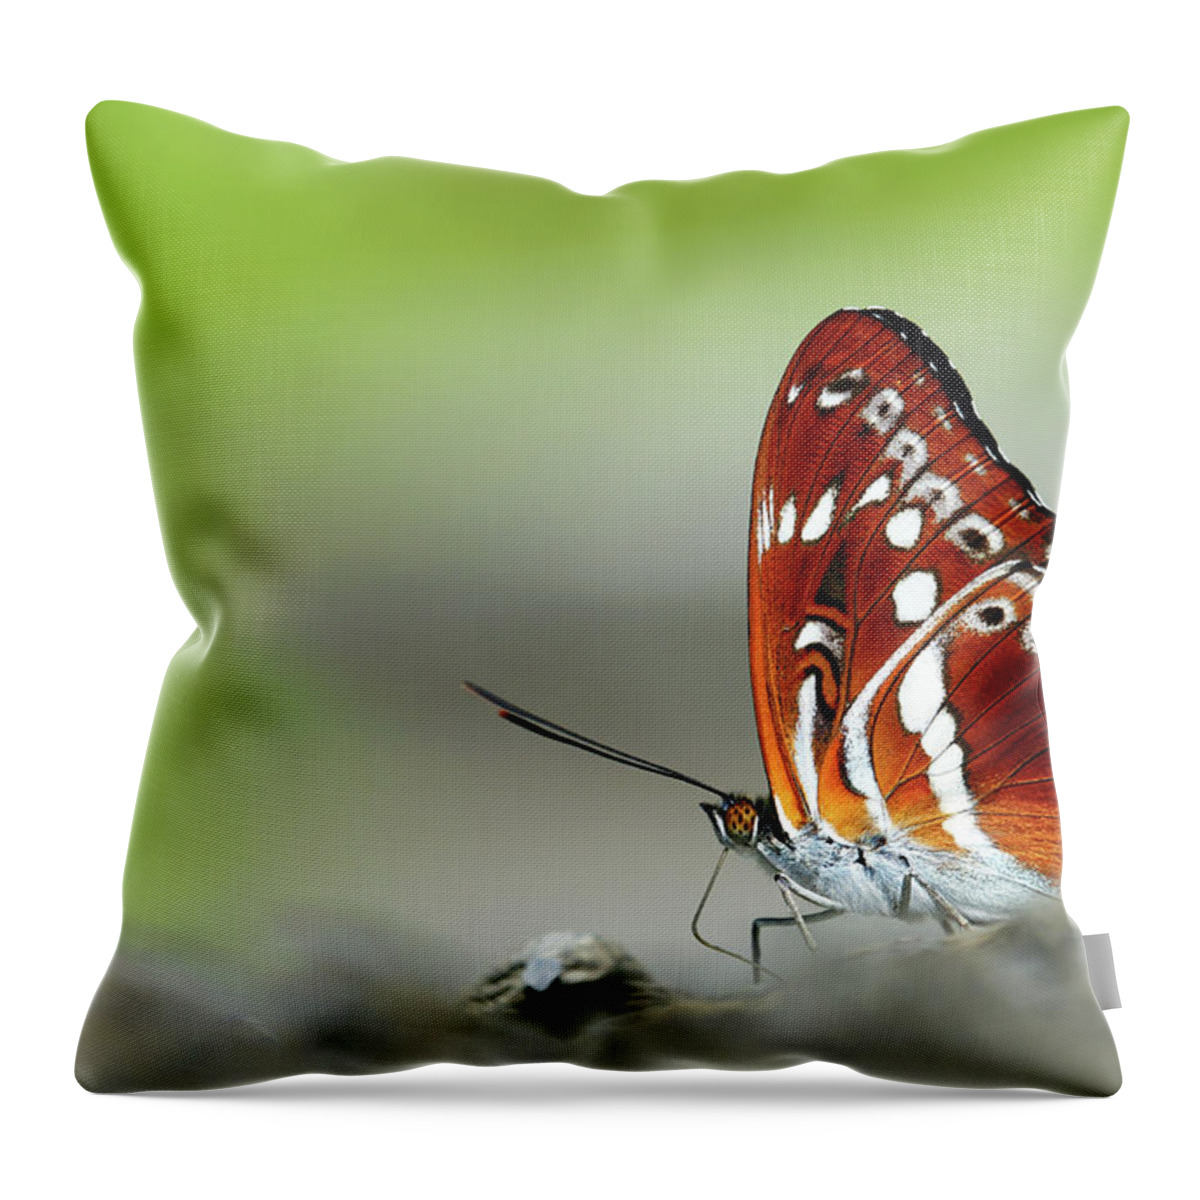 Taiwan Throw Pillow featuring the photograph Taiwan #1 by Ecology Photo